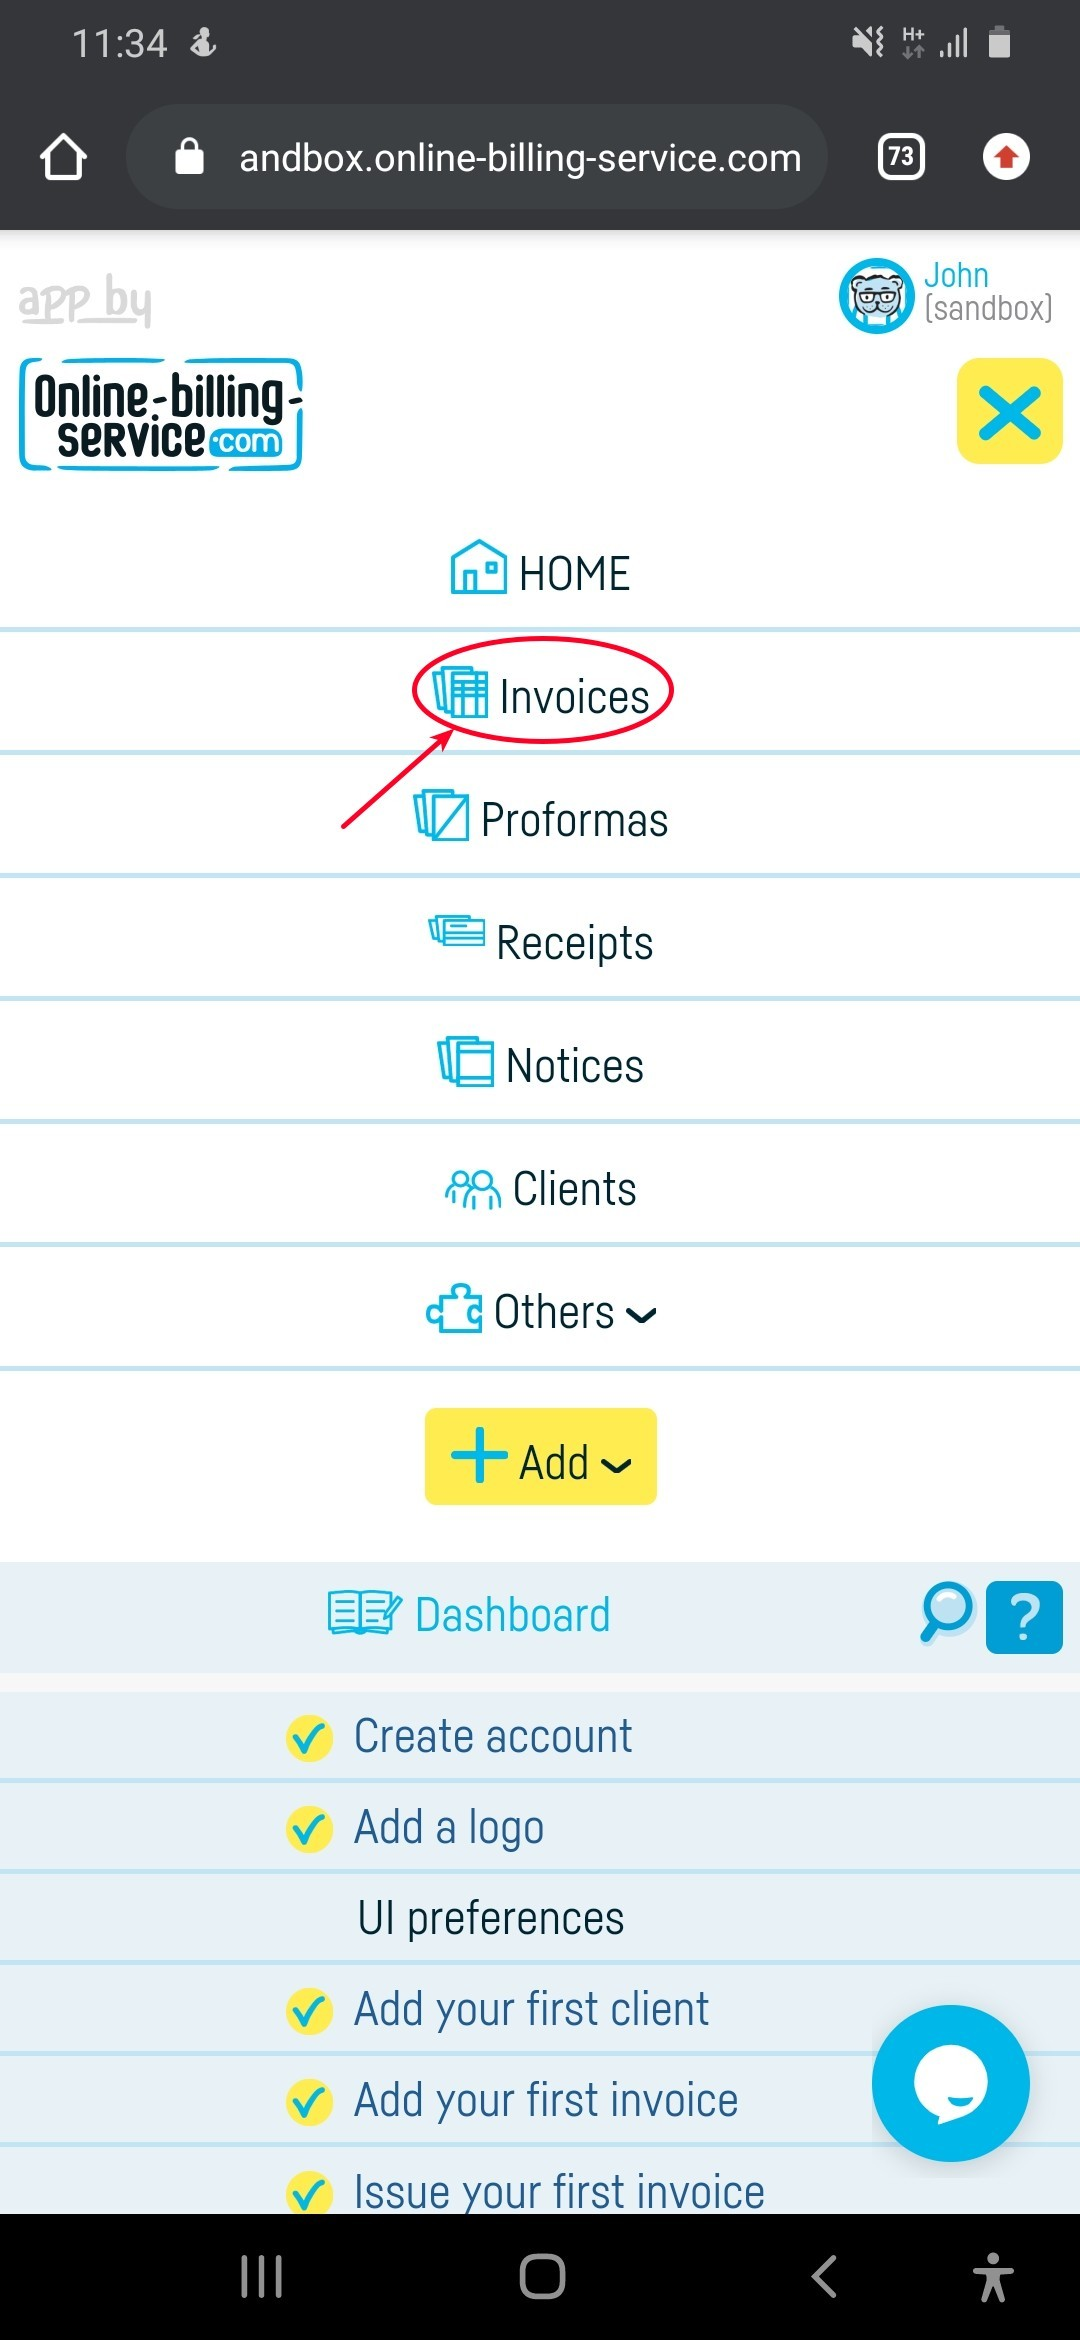 How do I export a group of invoices to SAGA? - step 1